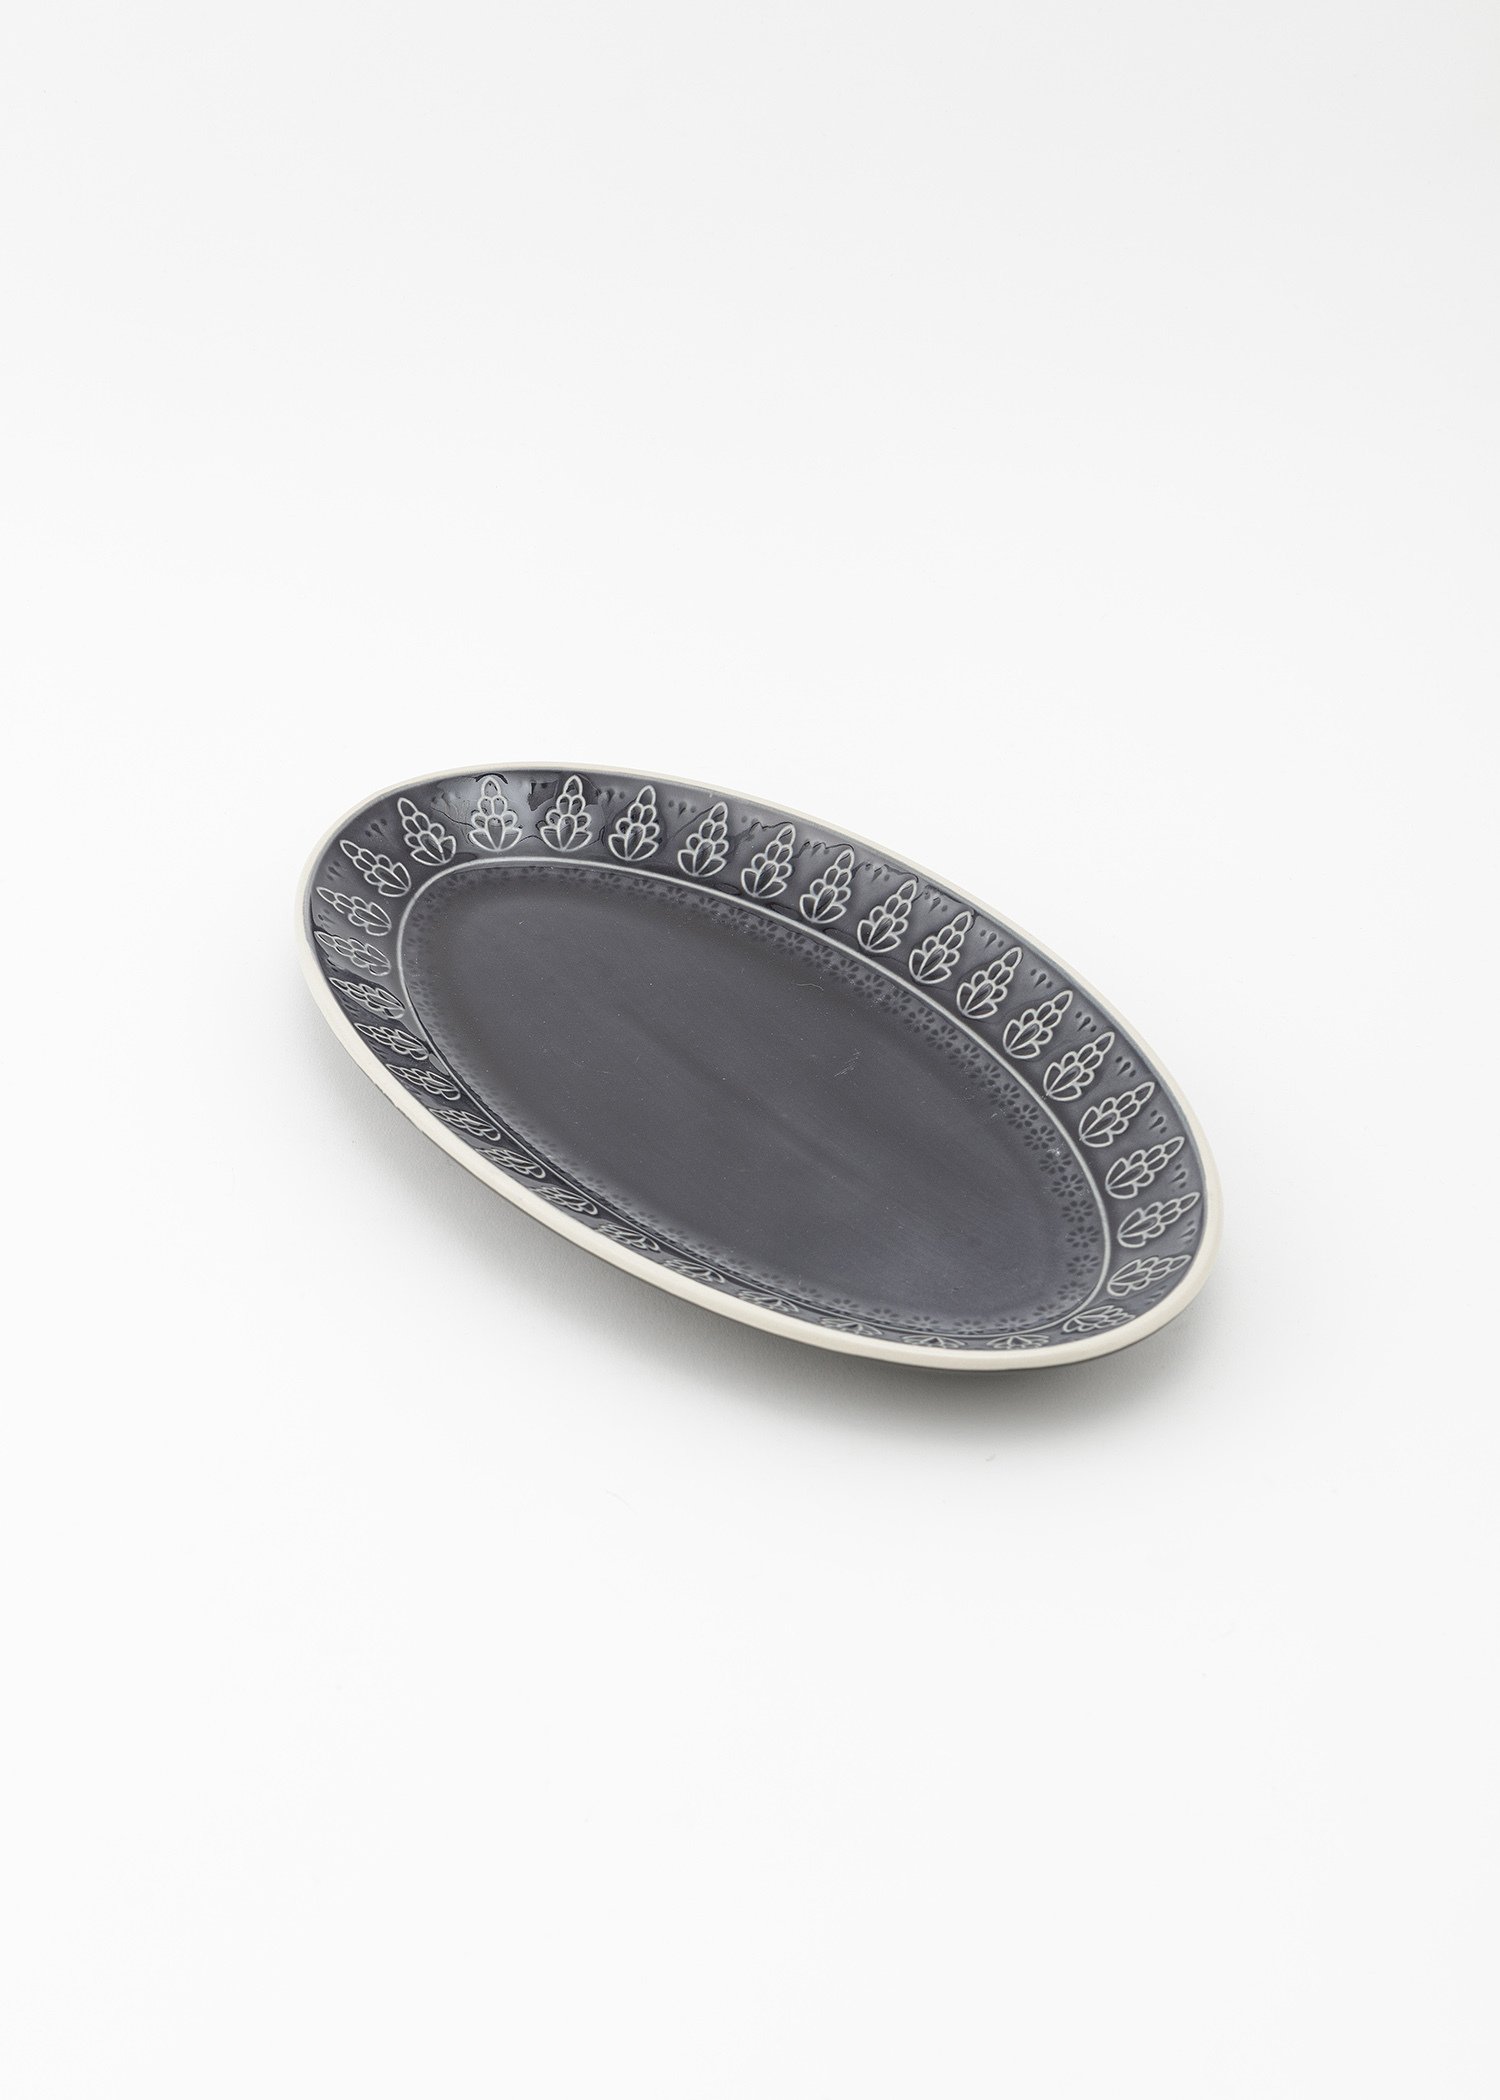 Stoneware oval serving plate Image 2